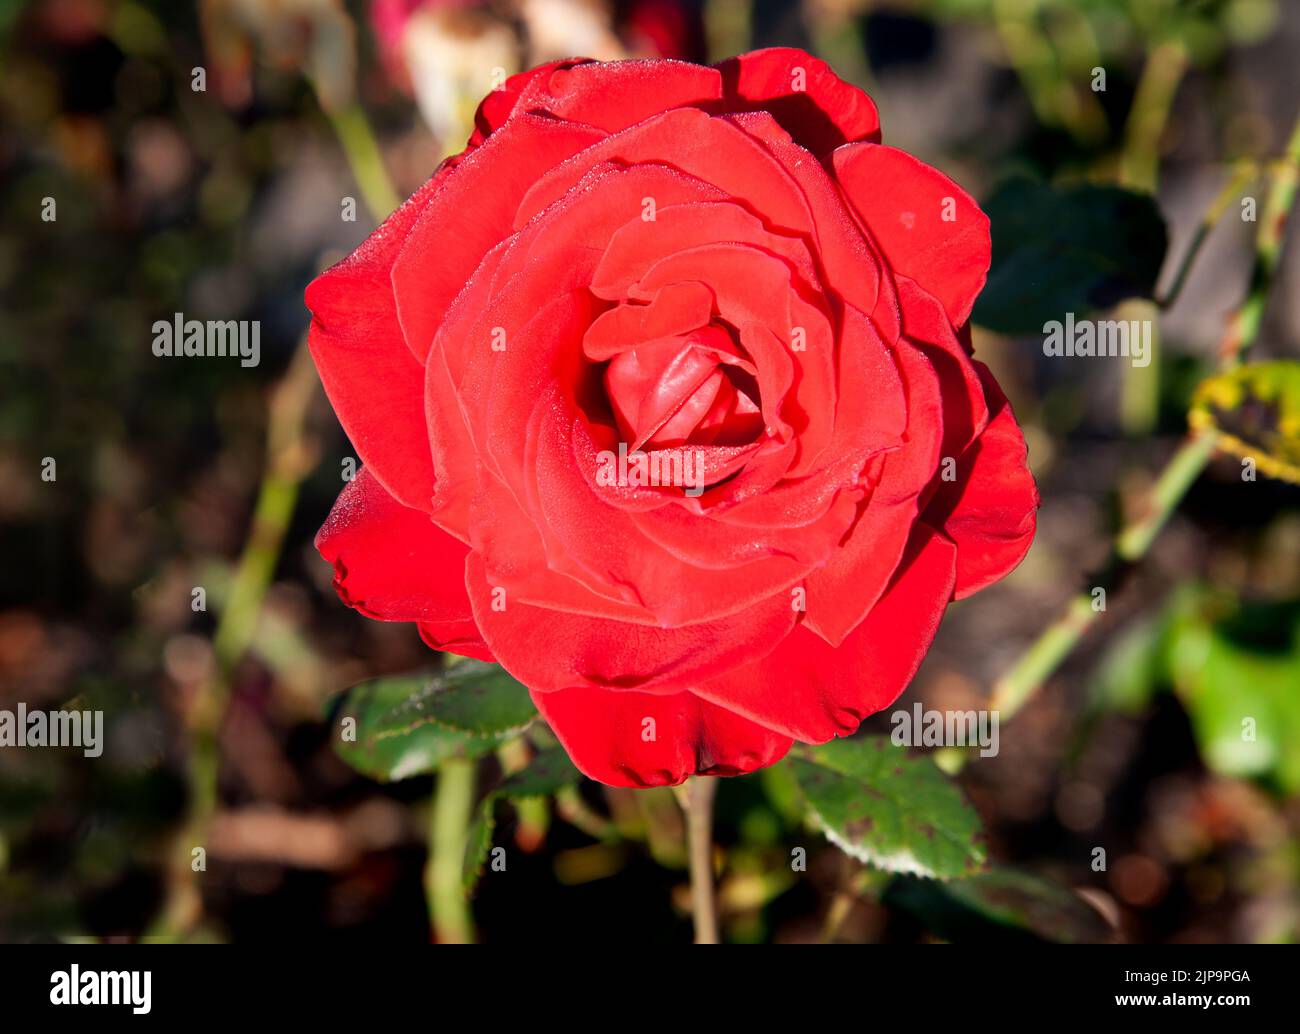 Red rose blossom in the garden Stock Photo